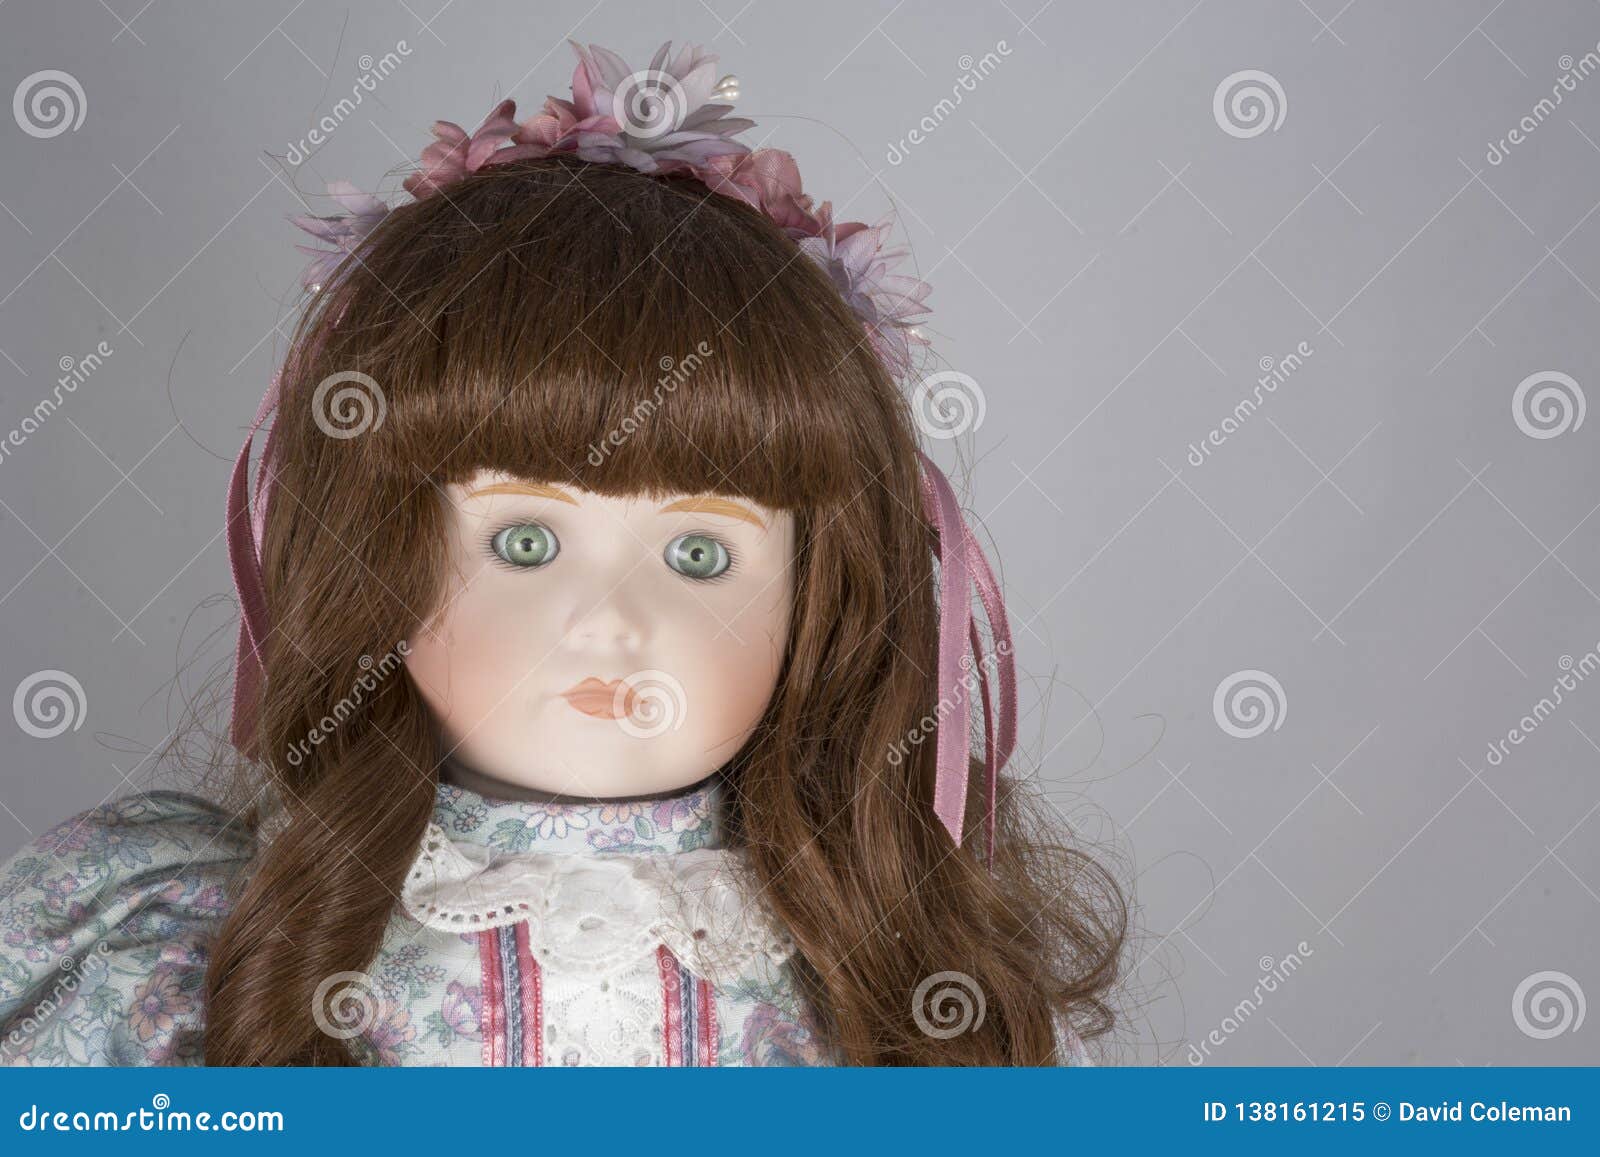 collectable porcelain doll on white